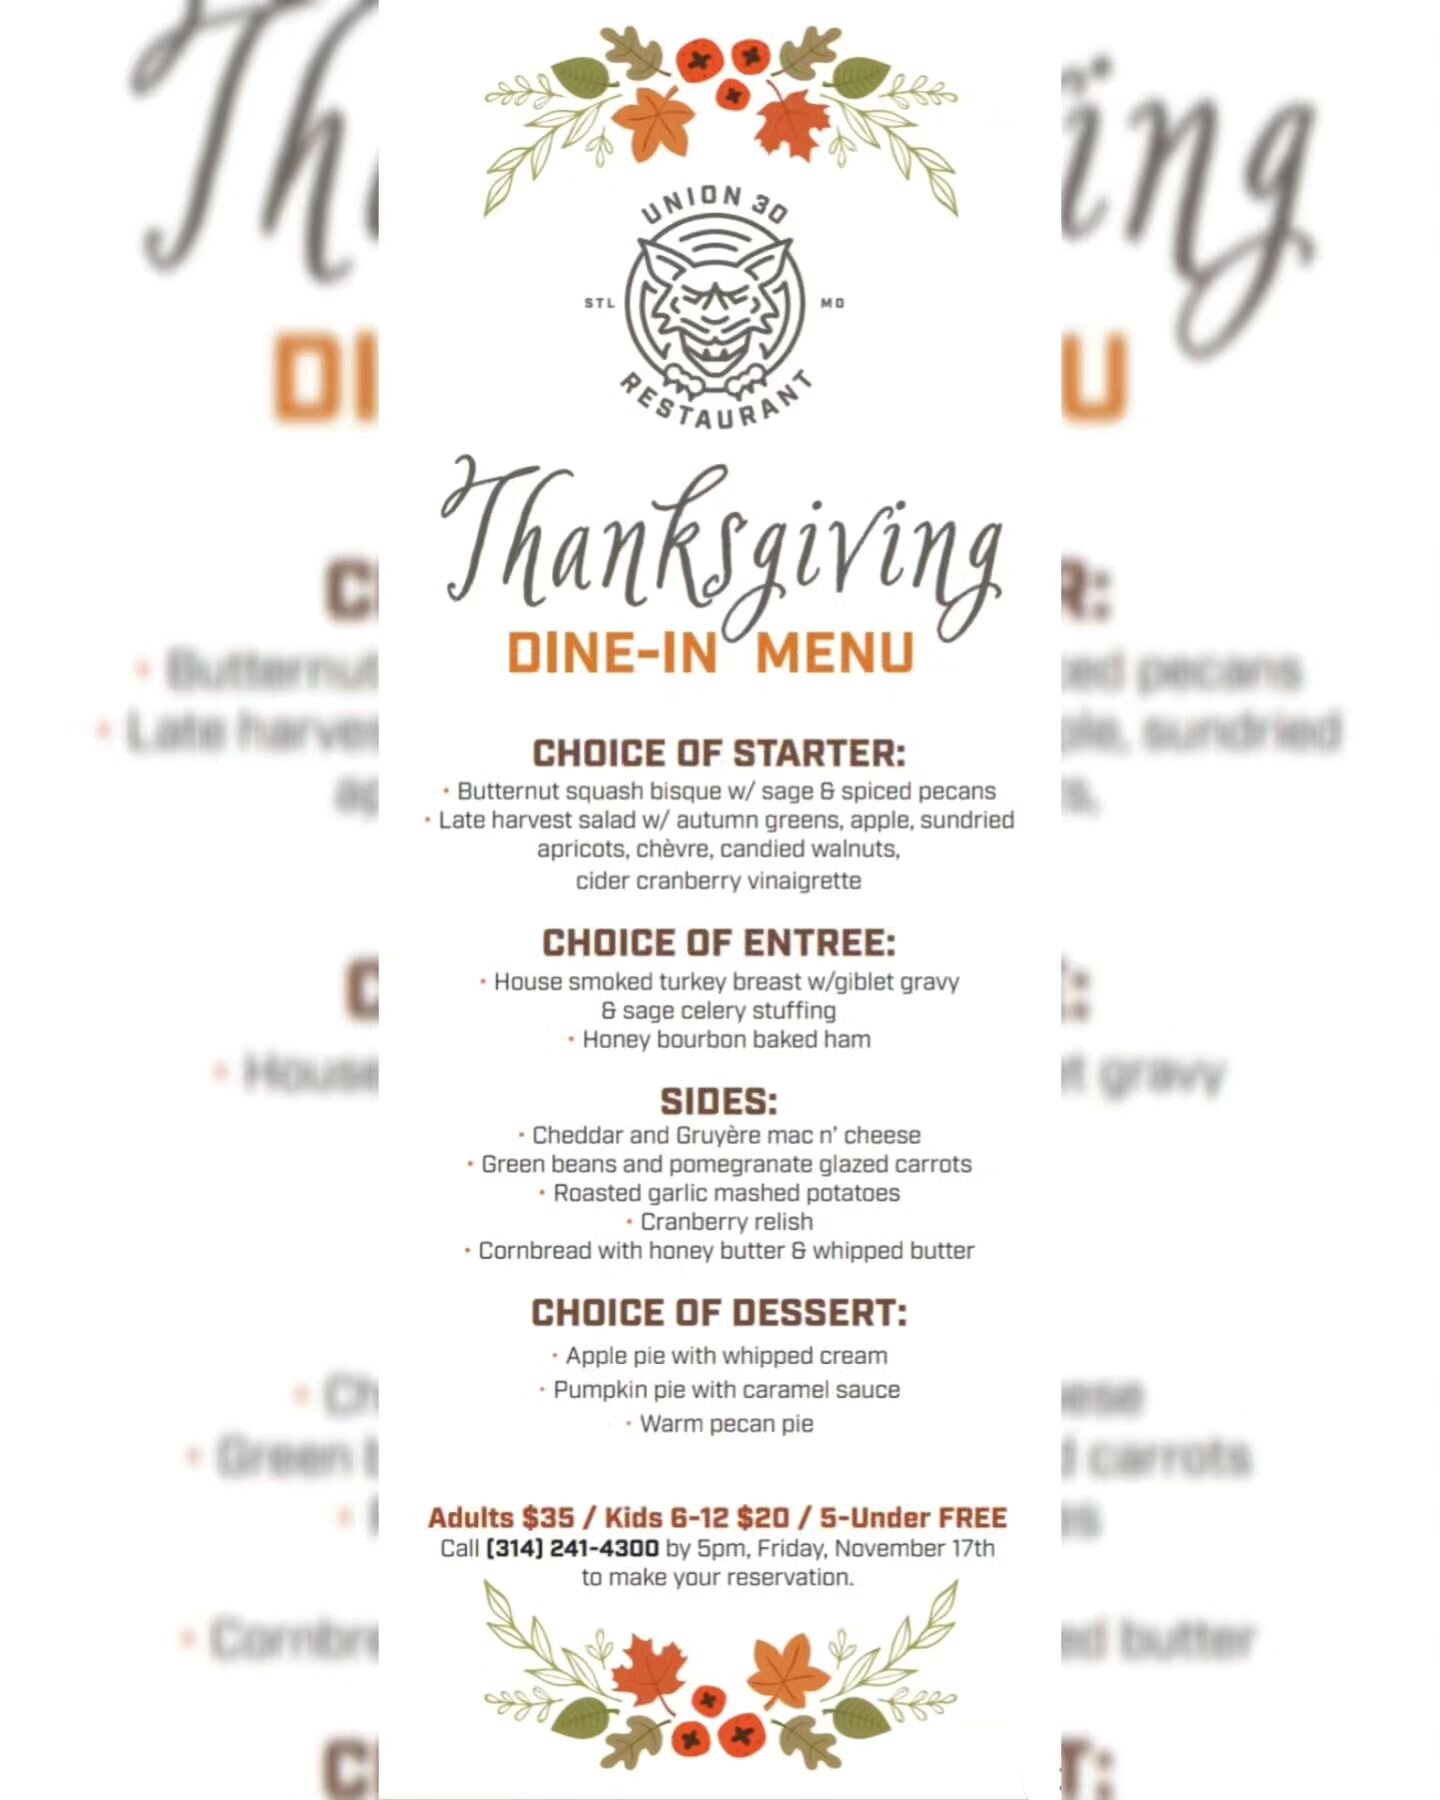 Need Thanksgiving Dinner? WE ARE OPEN! 

Dine-In with us and enjoy all the holiday favorites! Our 3- course prix fixe dinner will have you full and stuffed like a turkey!

Make your reservation today!

Or do Thanksgiving To-Go!

Reservations and orde